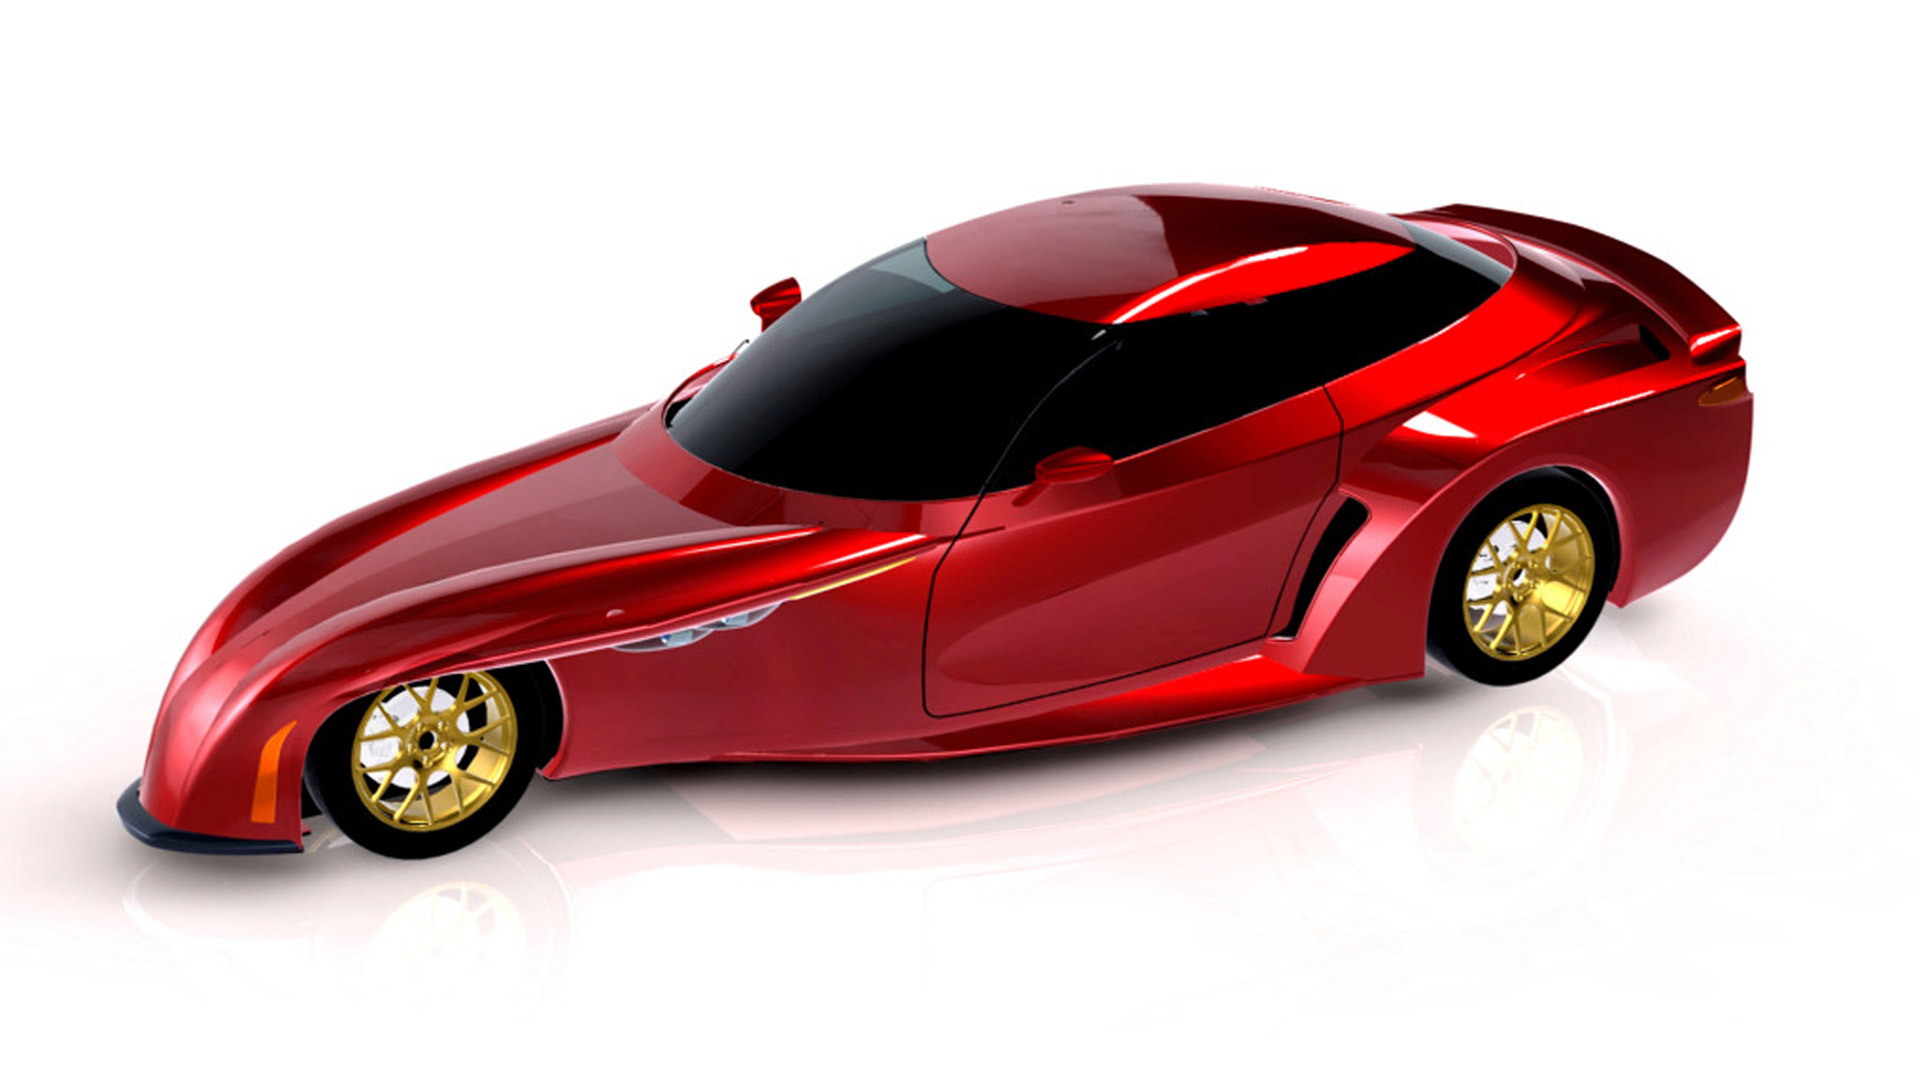 DeltaWing four-seater road car concept